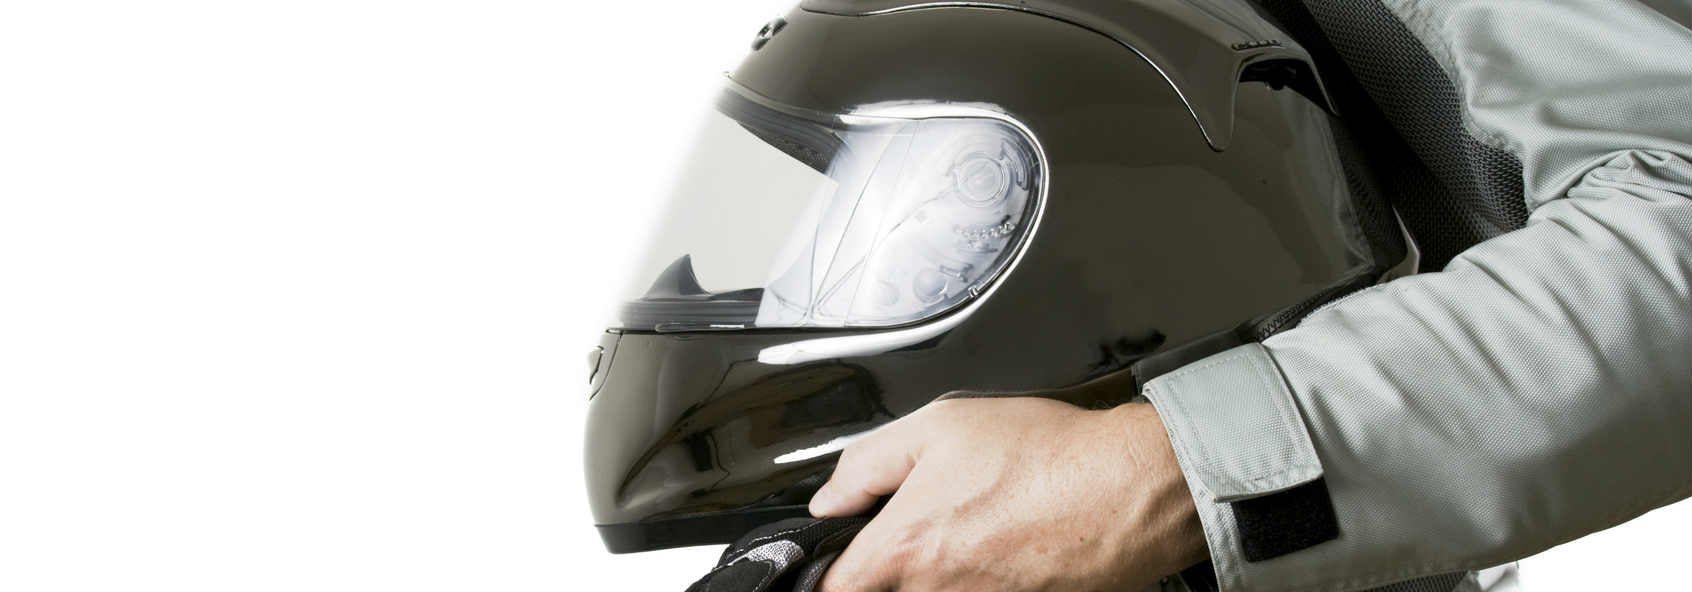 Motorcycle helmets: The legal standards